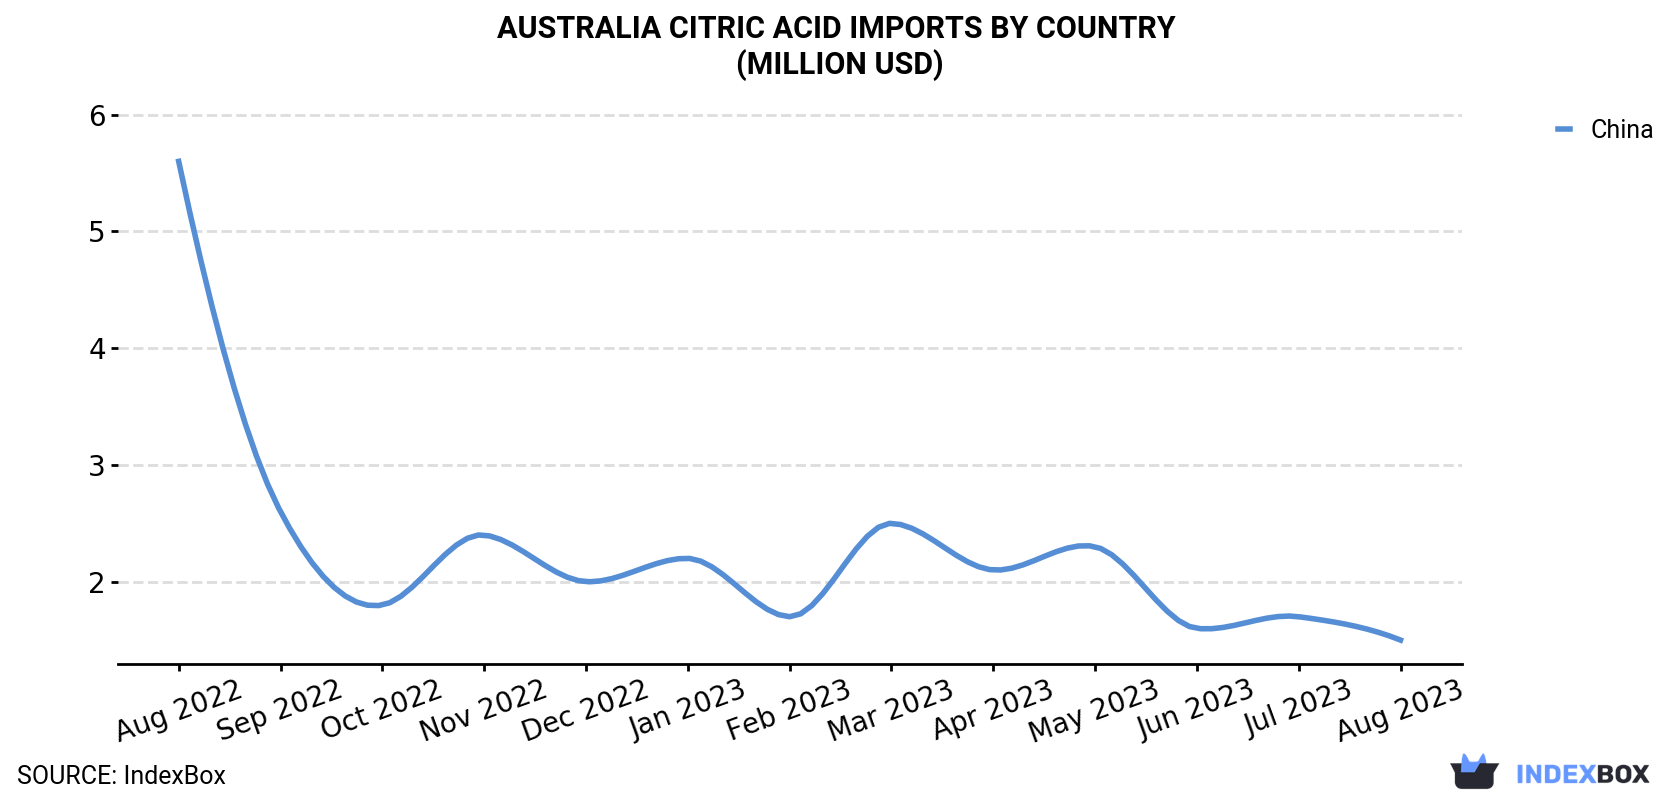 Australia Citric Acid Imports By Country (Million USD)